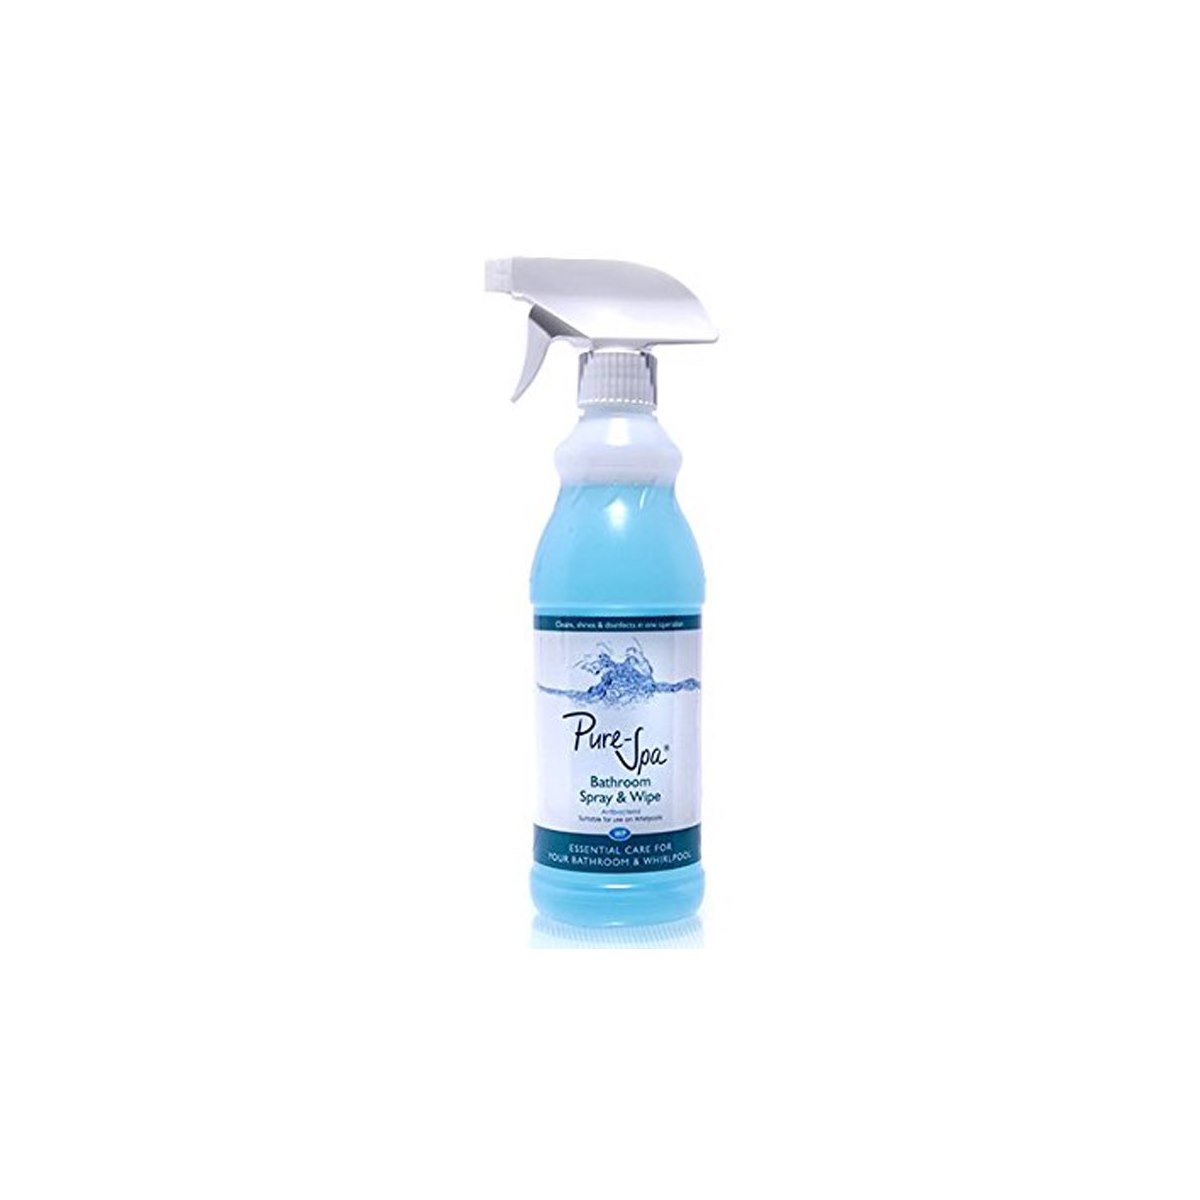 Pure Spa Bathroom and Whirlpool Anti-Bacterial Spray and Wipe 500ml